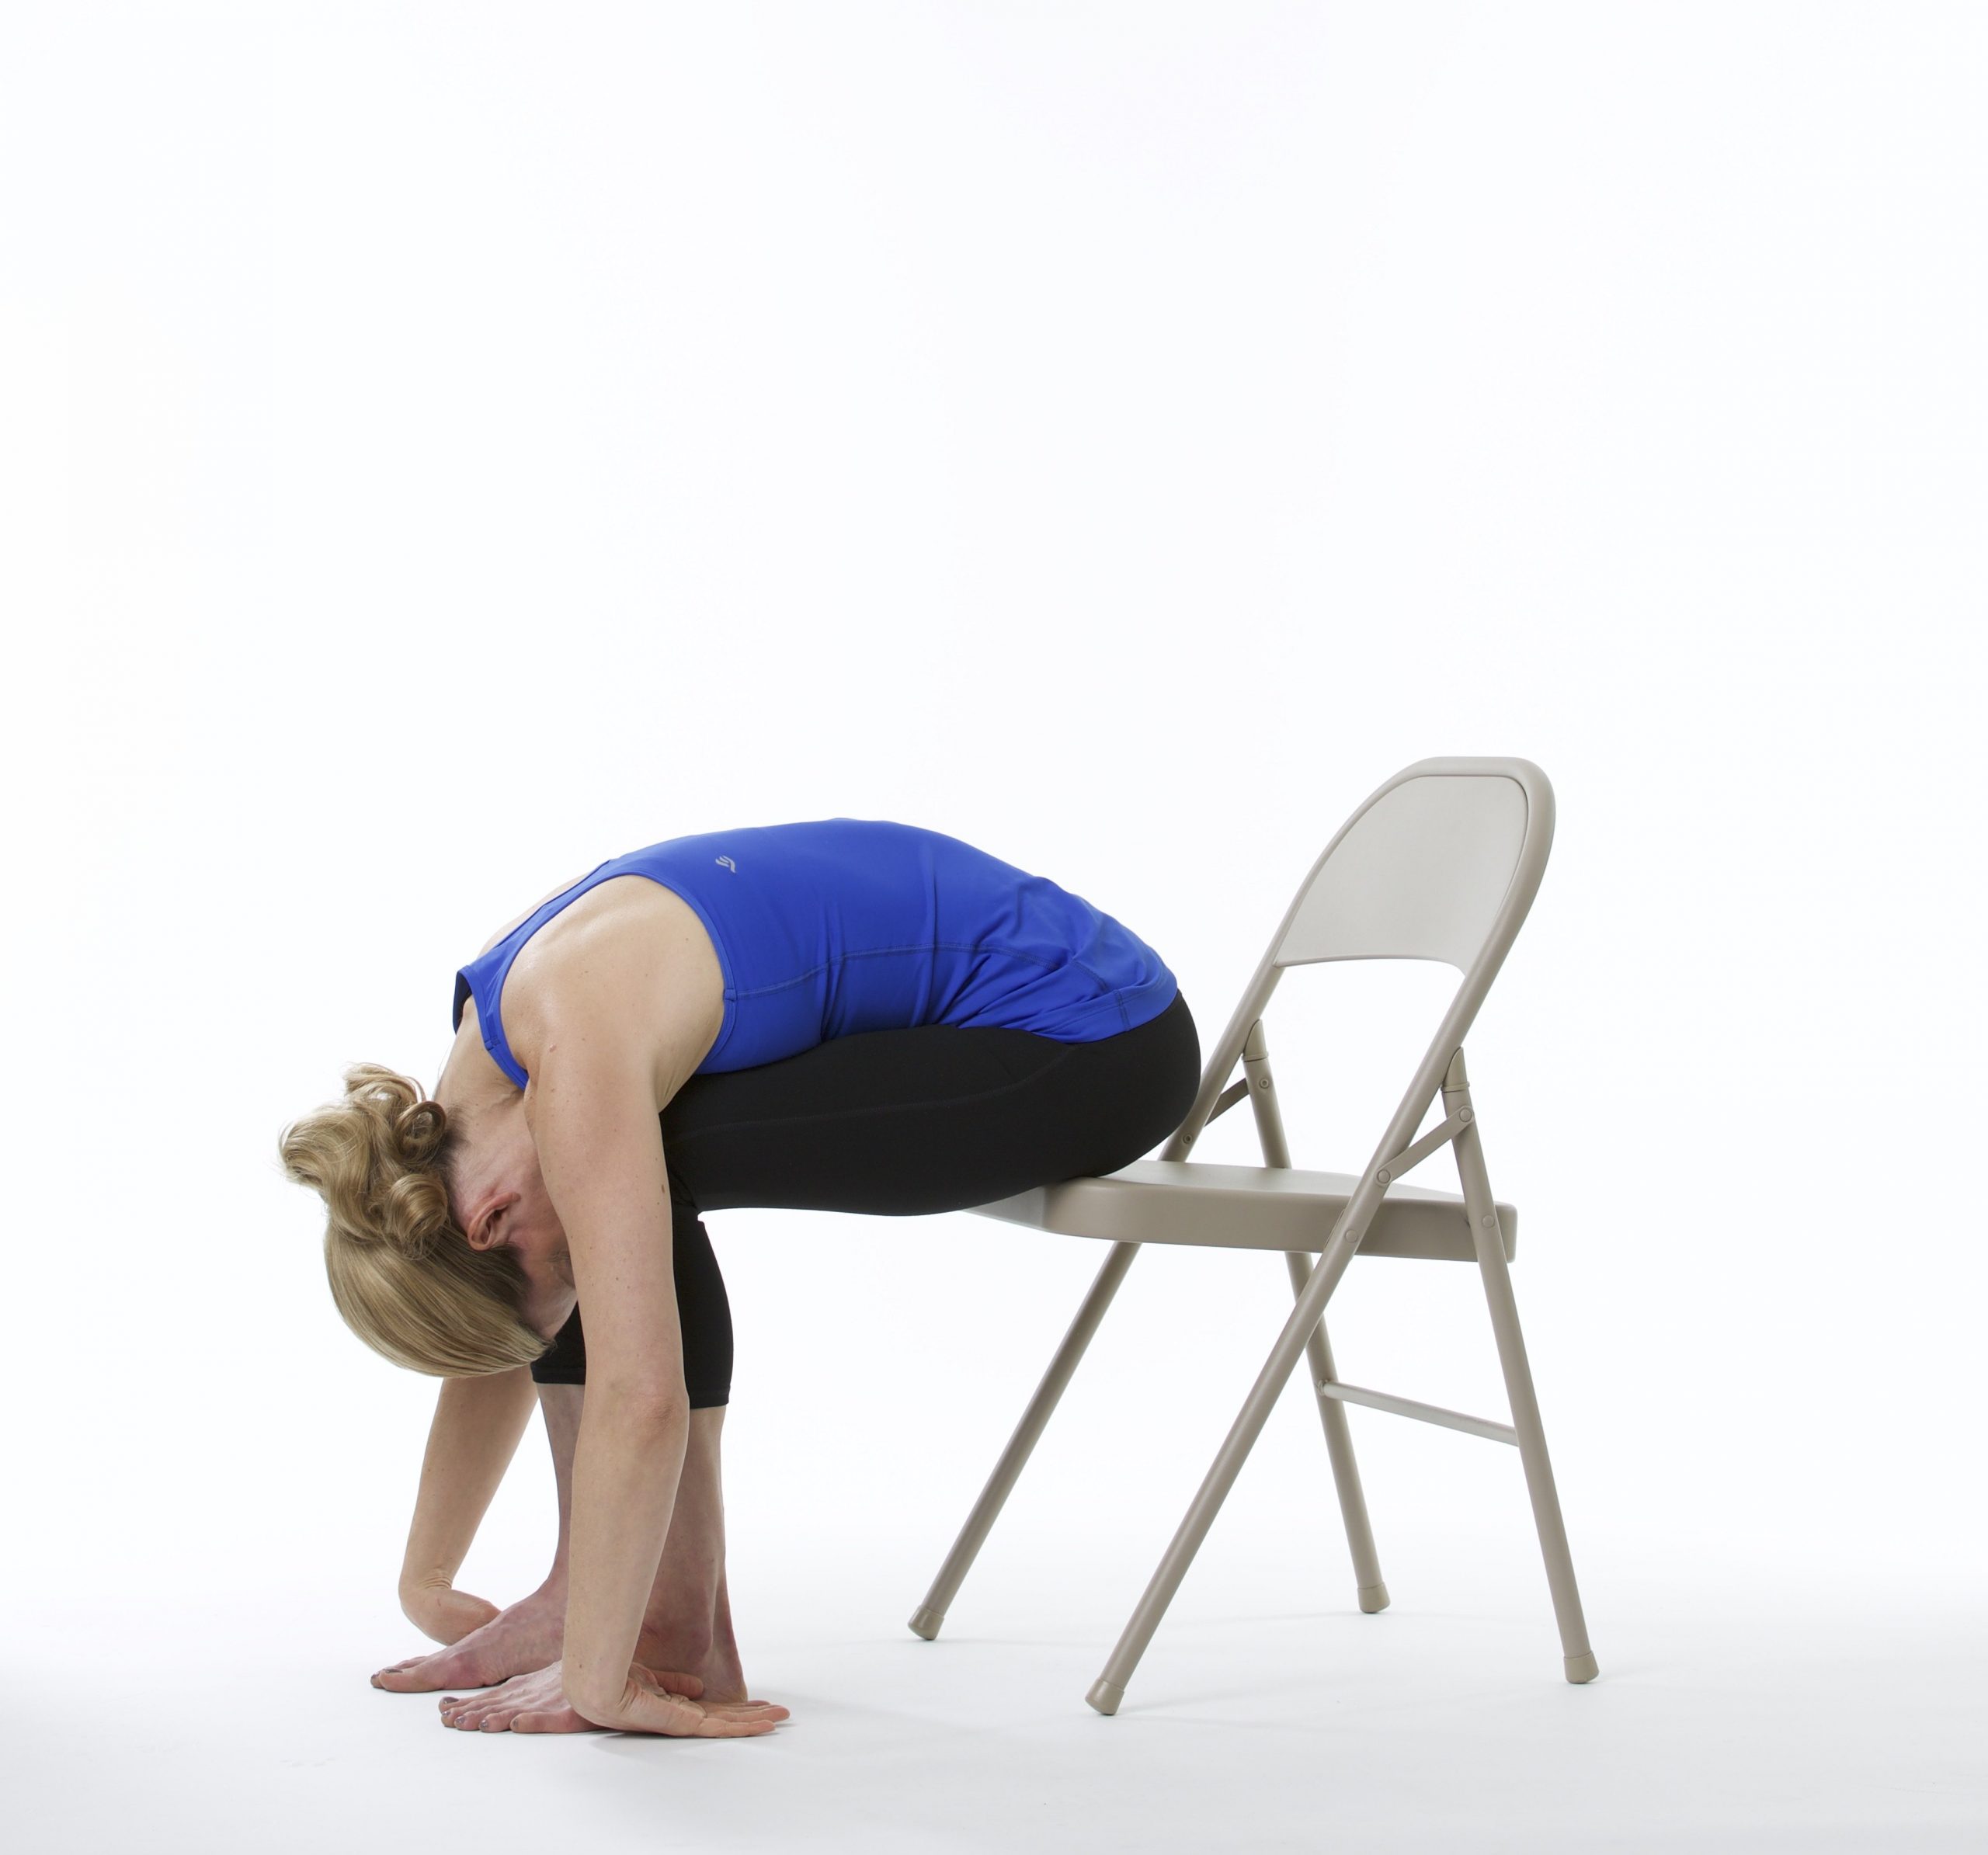 Stay Limber in Any Seat: Discover These 5 Hip Stretches You Can Do From Your Chair